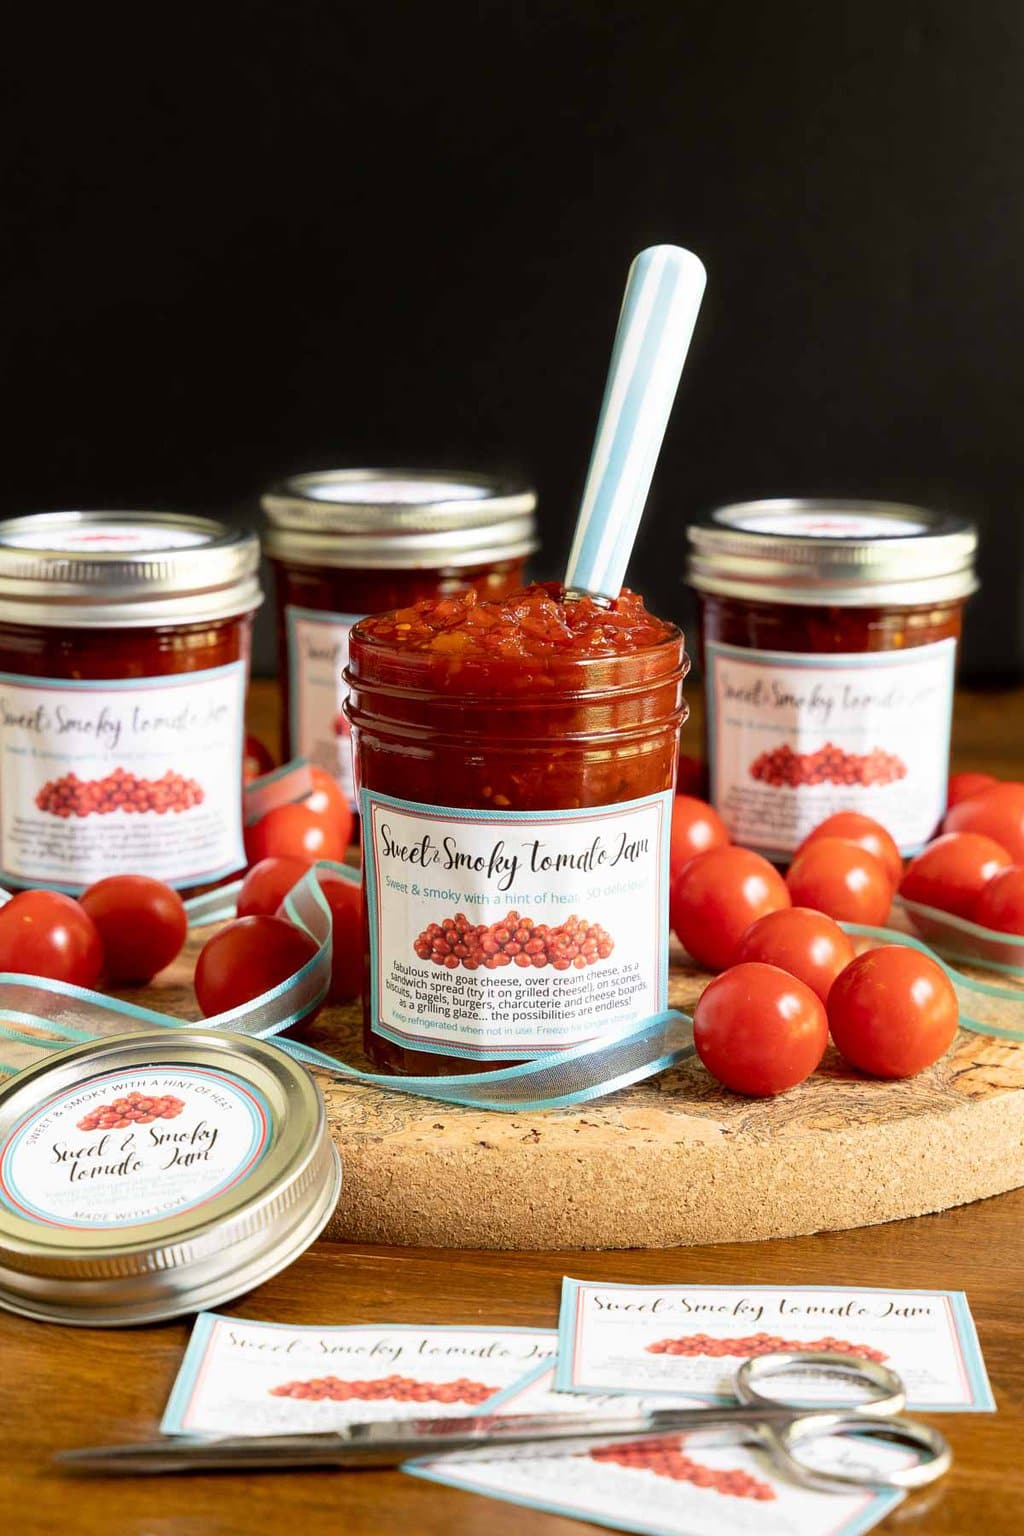 Vertical photo of jars of Sweet and Smoky Tomato Jam with custom labels for gift giving.